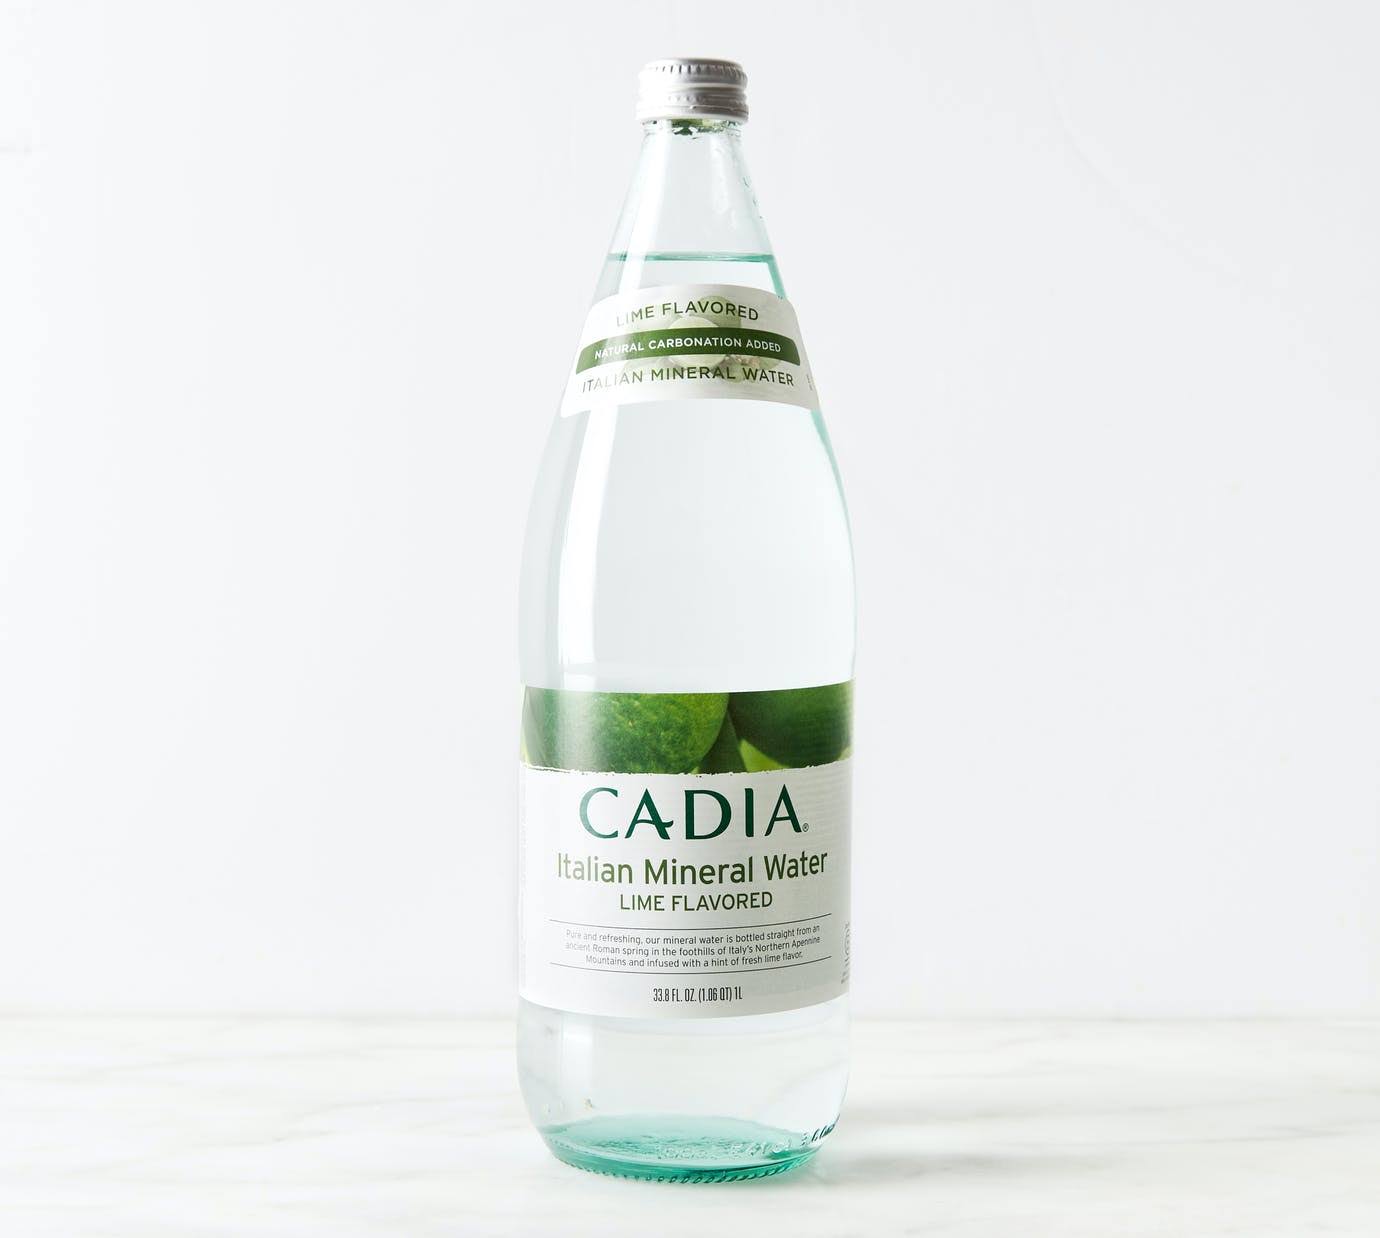 Cadia Italian Mineral Water, Lime Flavored - 33.8 fl oz